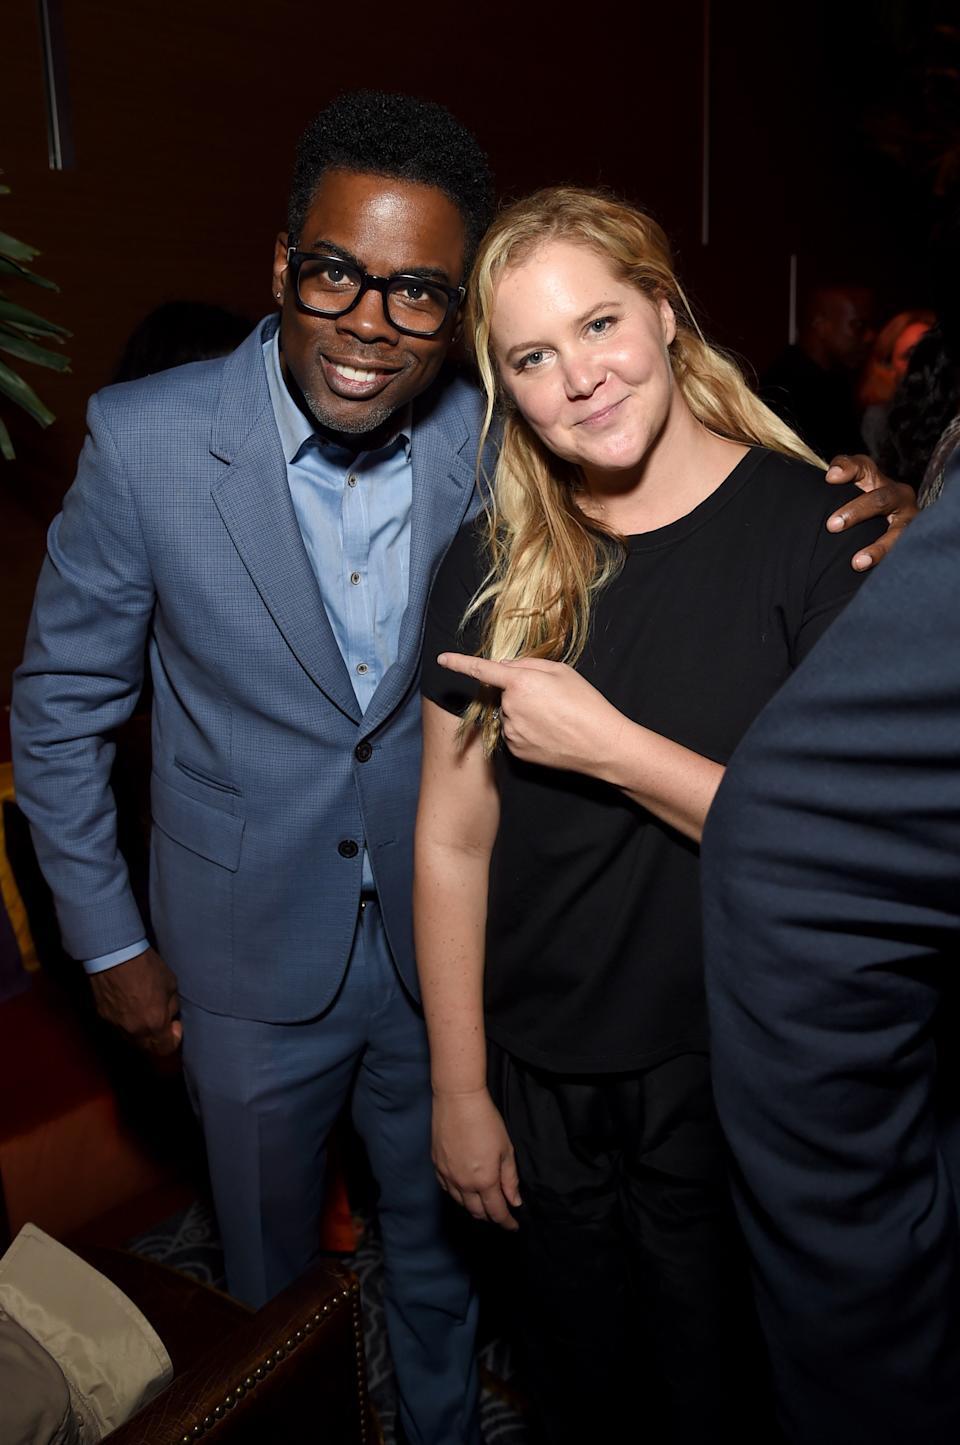 NEW YORK, NY - SEPTEMBER 12: Chris Rock and Amy Schumer attend the Next 2018 GOOD + Foundation Gala # x002019;  s Evening of Comedy + Music Benefit, presented by Samsung Electronics America at the Ziegfeld Ballroom on September 12, 2018 in New York City.  (Photo by Jimmy McCarthy/Getty Images for GOOD+)